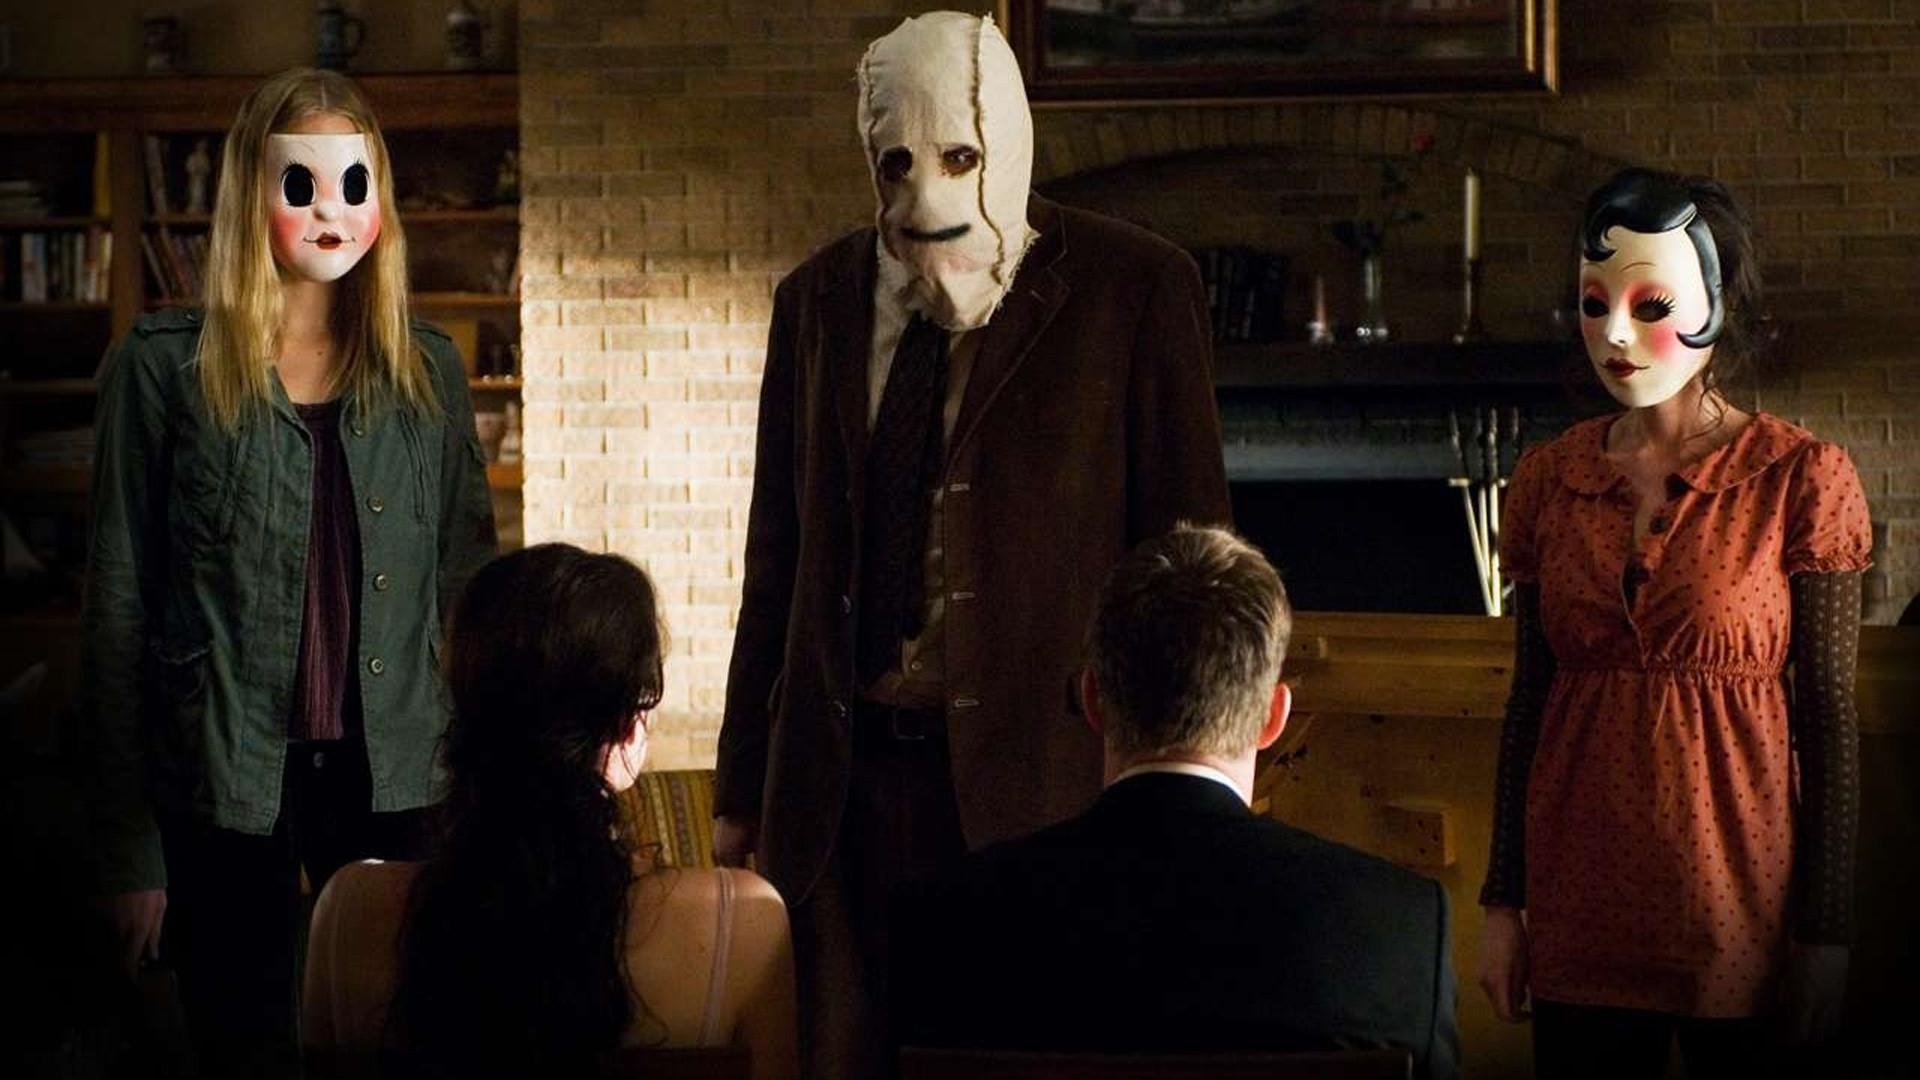 The Terrifying Pointlessness of 'The Strangers'